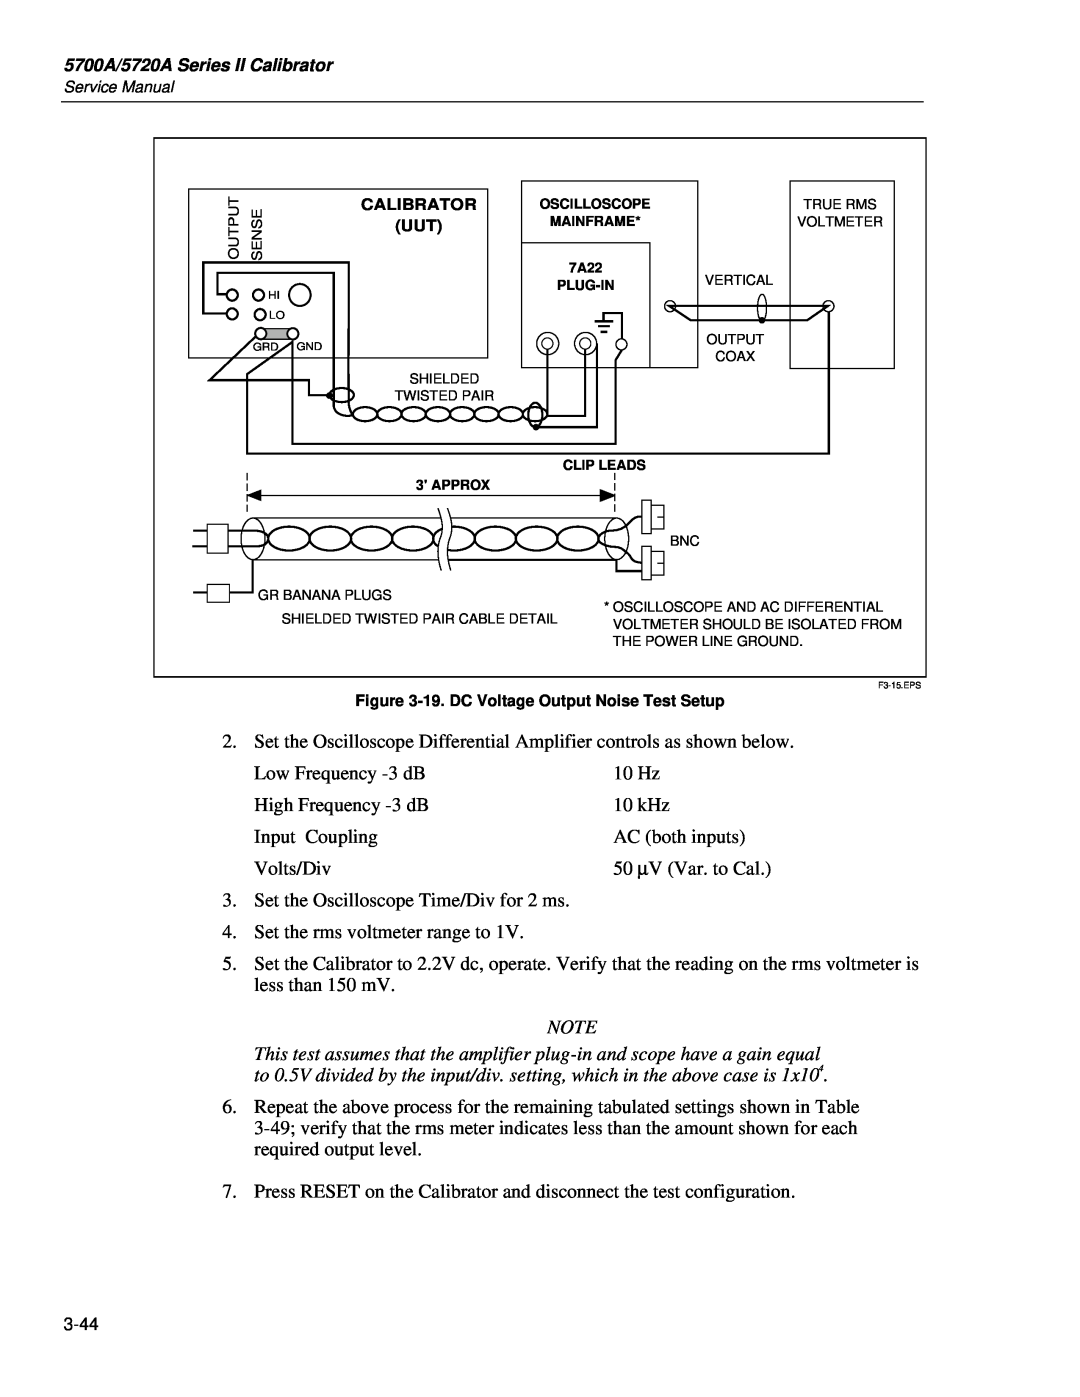 Fluke 5720A service manual Set the Oscilloscope Differential Amplifier controls as shown below 